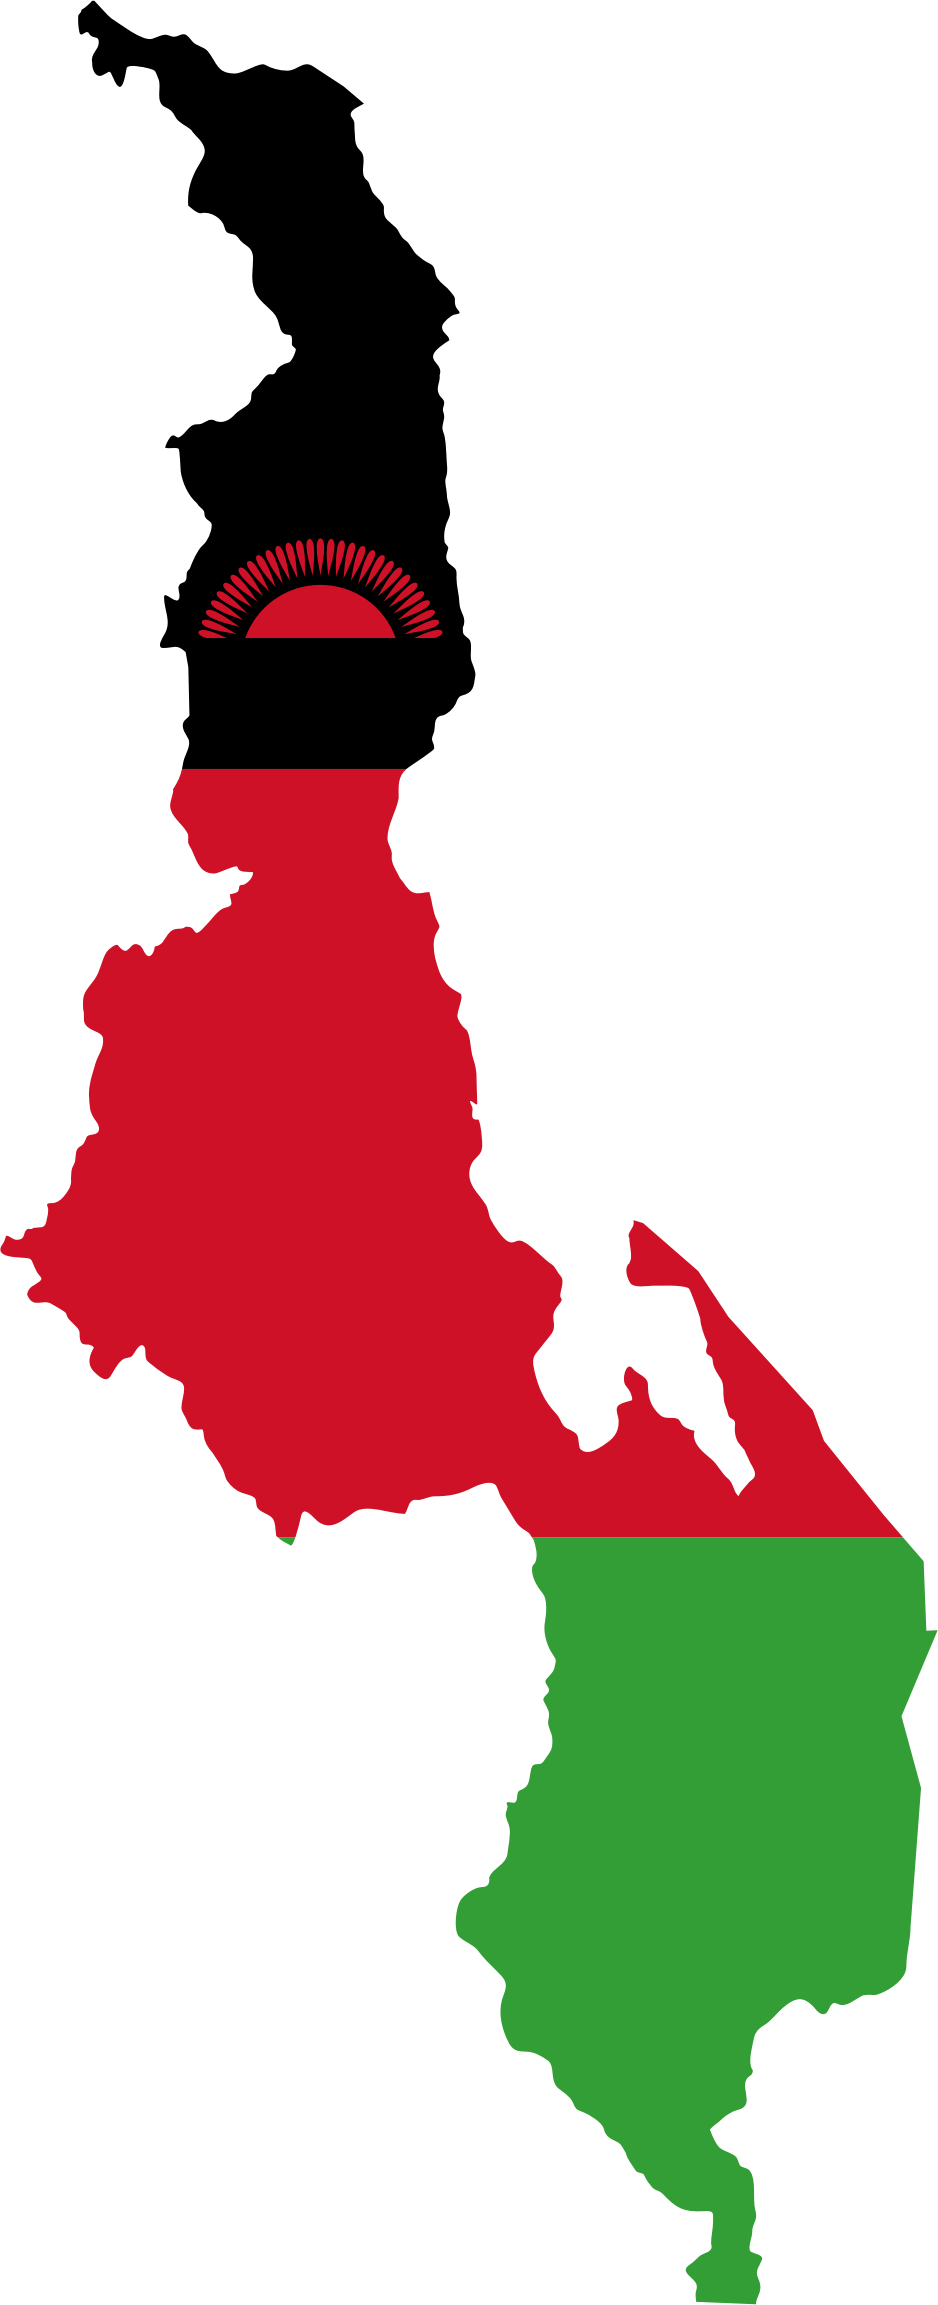 A Red And Green Outline Of A Country